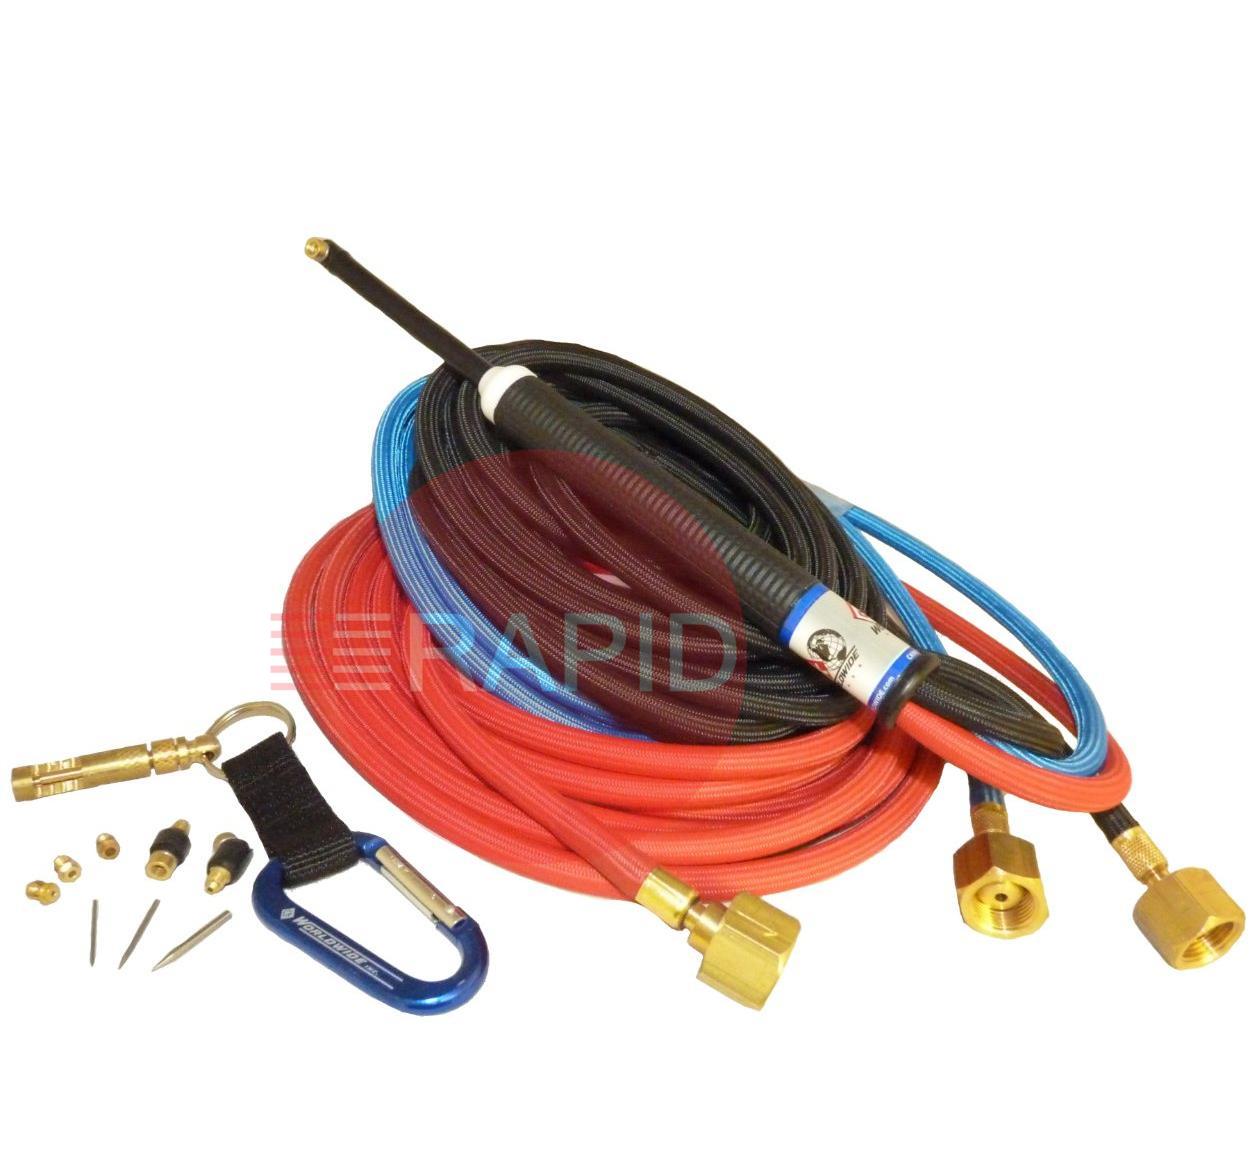 CK-MR1425SF  CK MR140 Water-Cooled Micro Torch Package, 140 Amp, with 7.6m Superflex Cables, 3/8 BSP